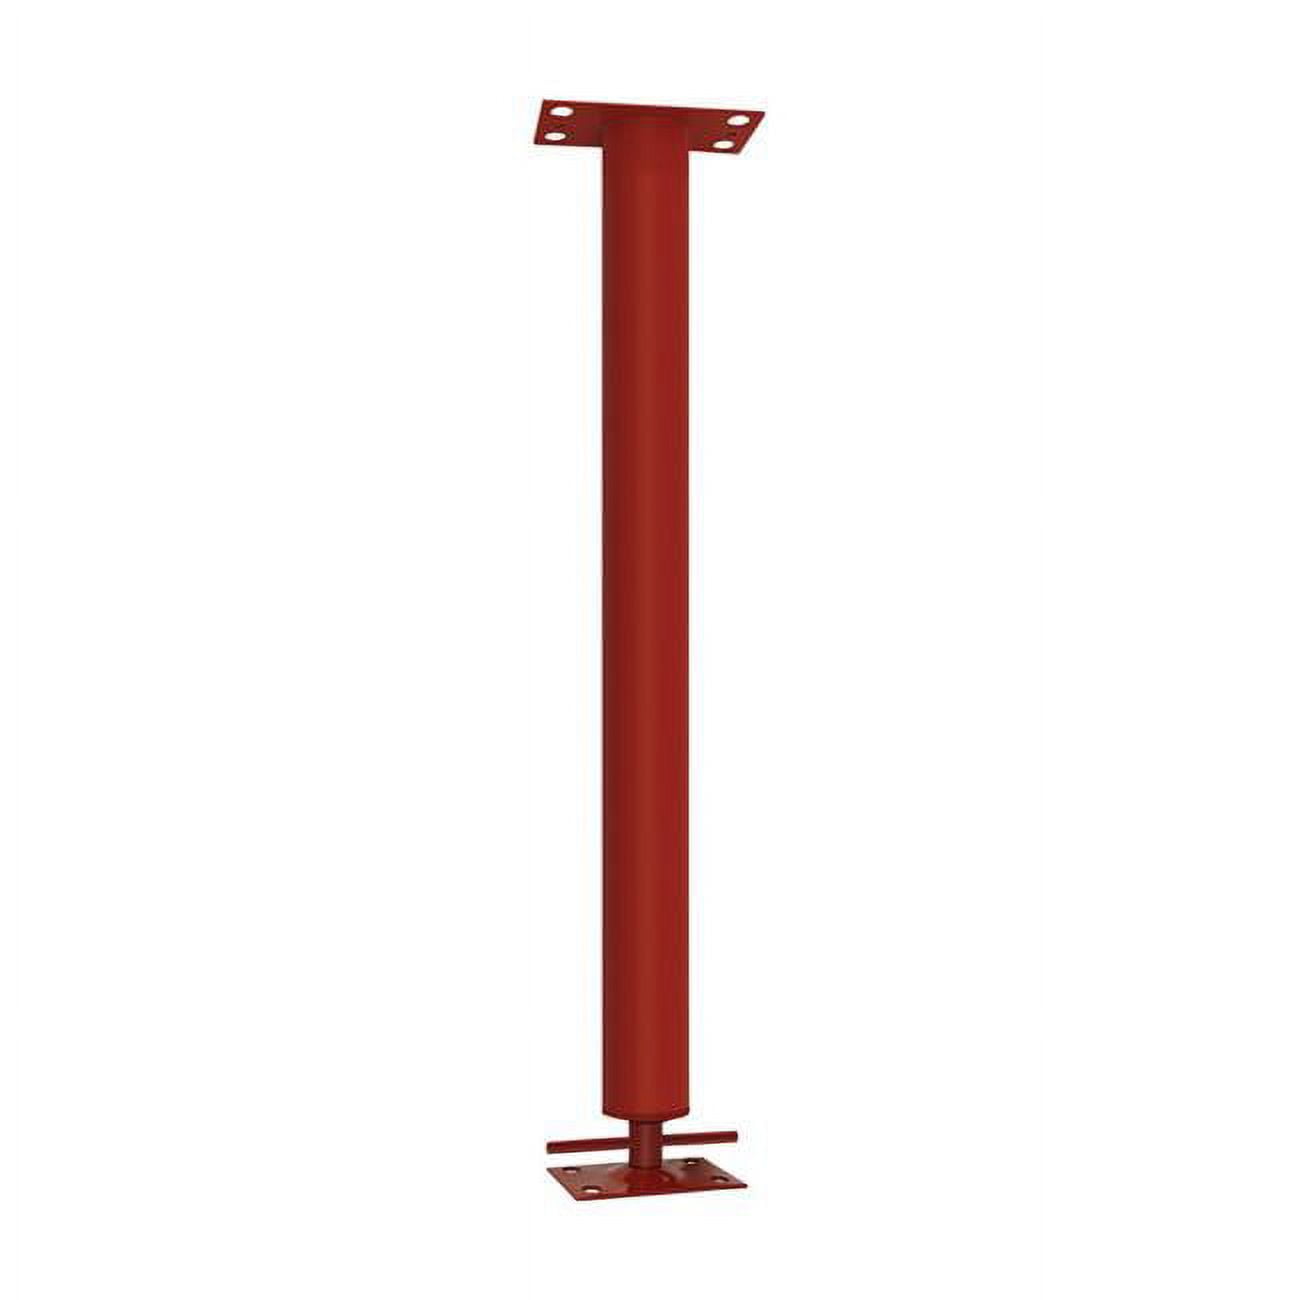 5007297 3 Dia. X 20 In. Adjustable Building Support Column - 24700 Lbs